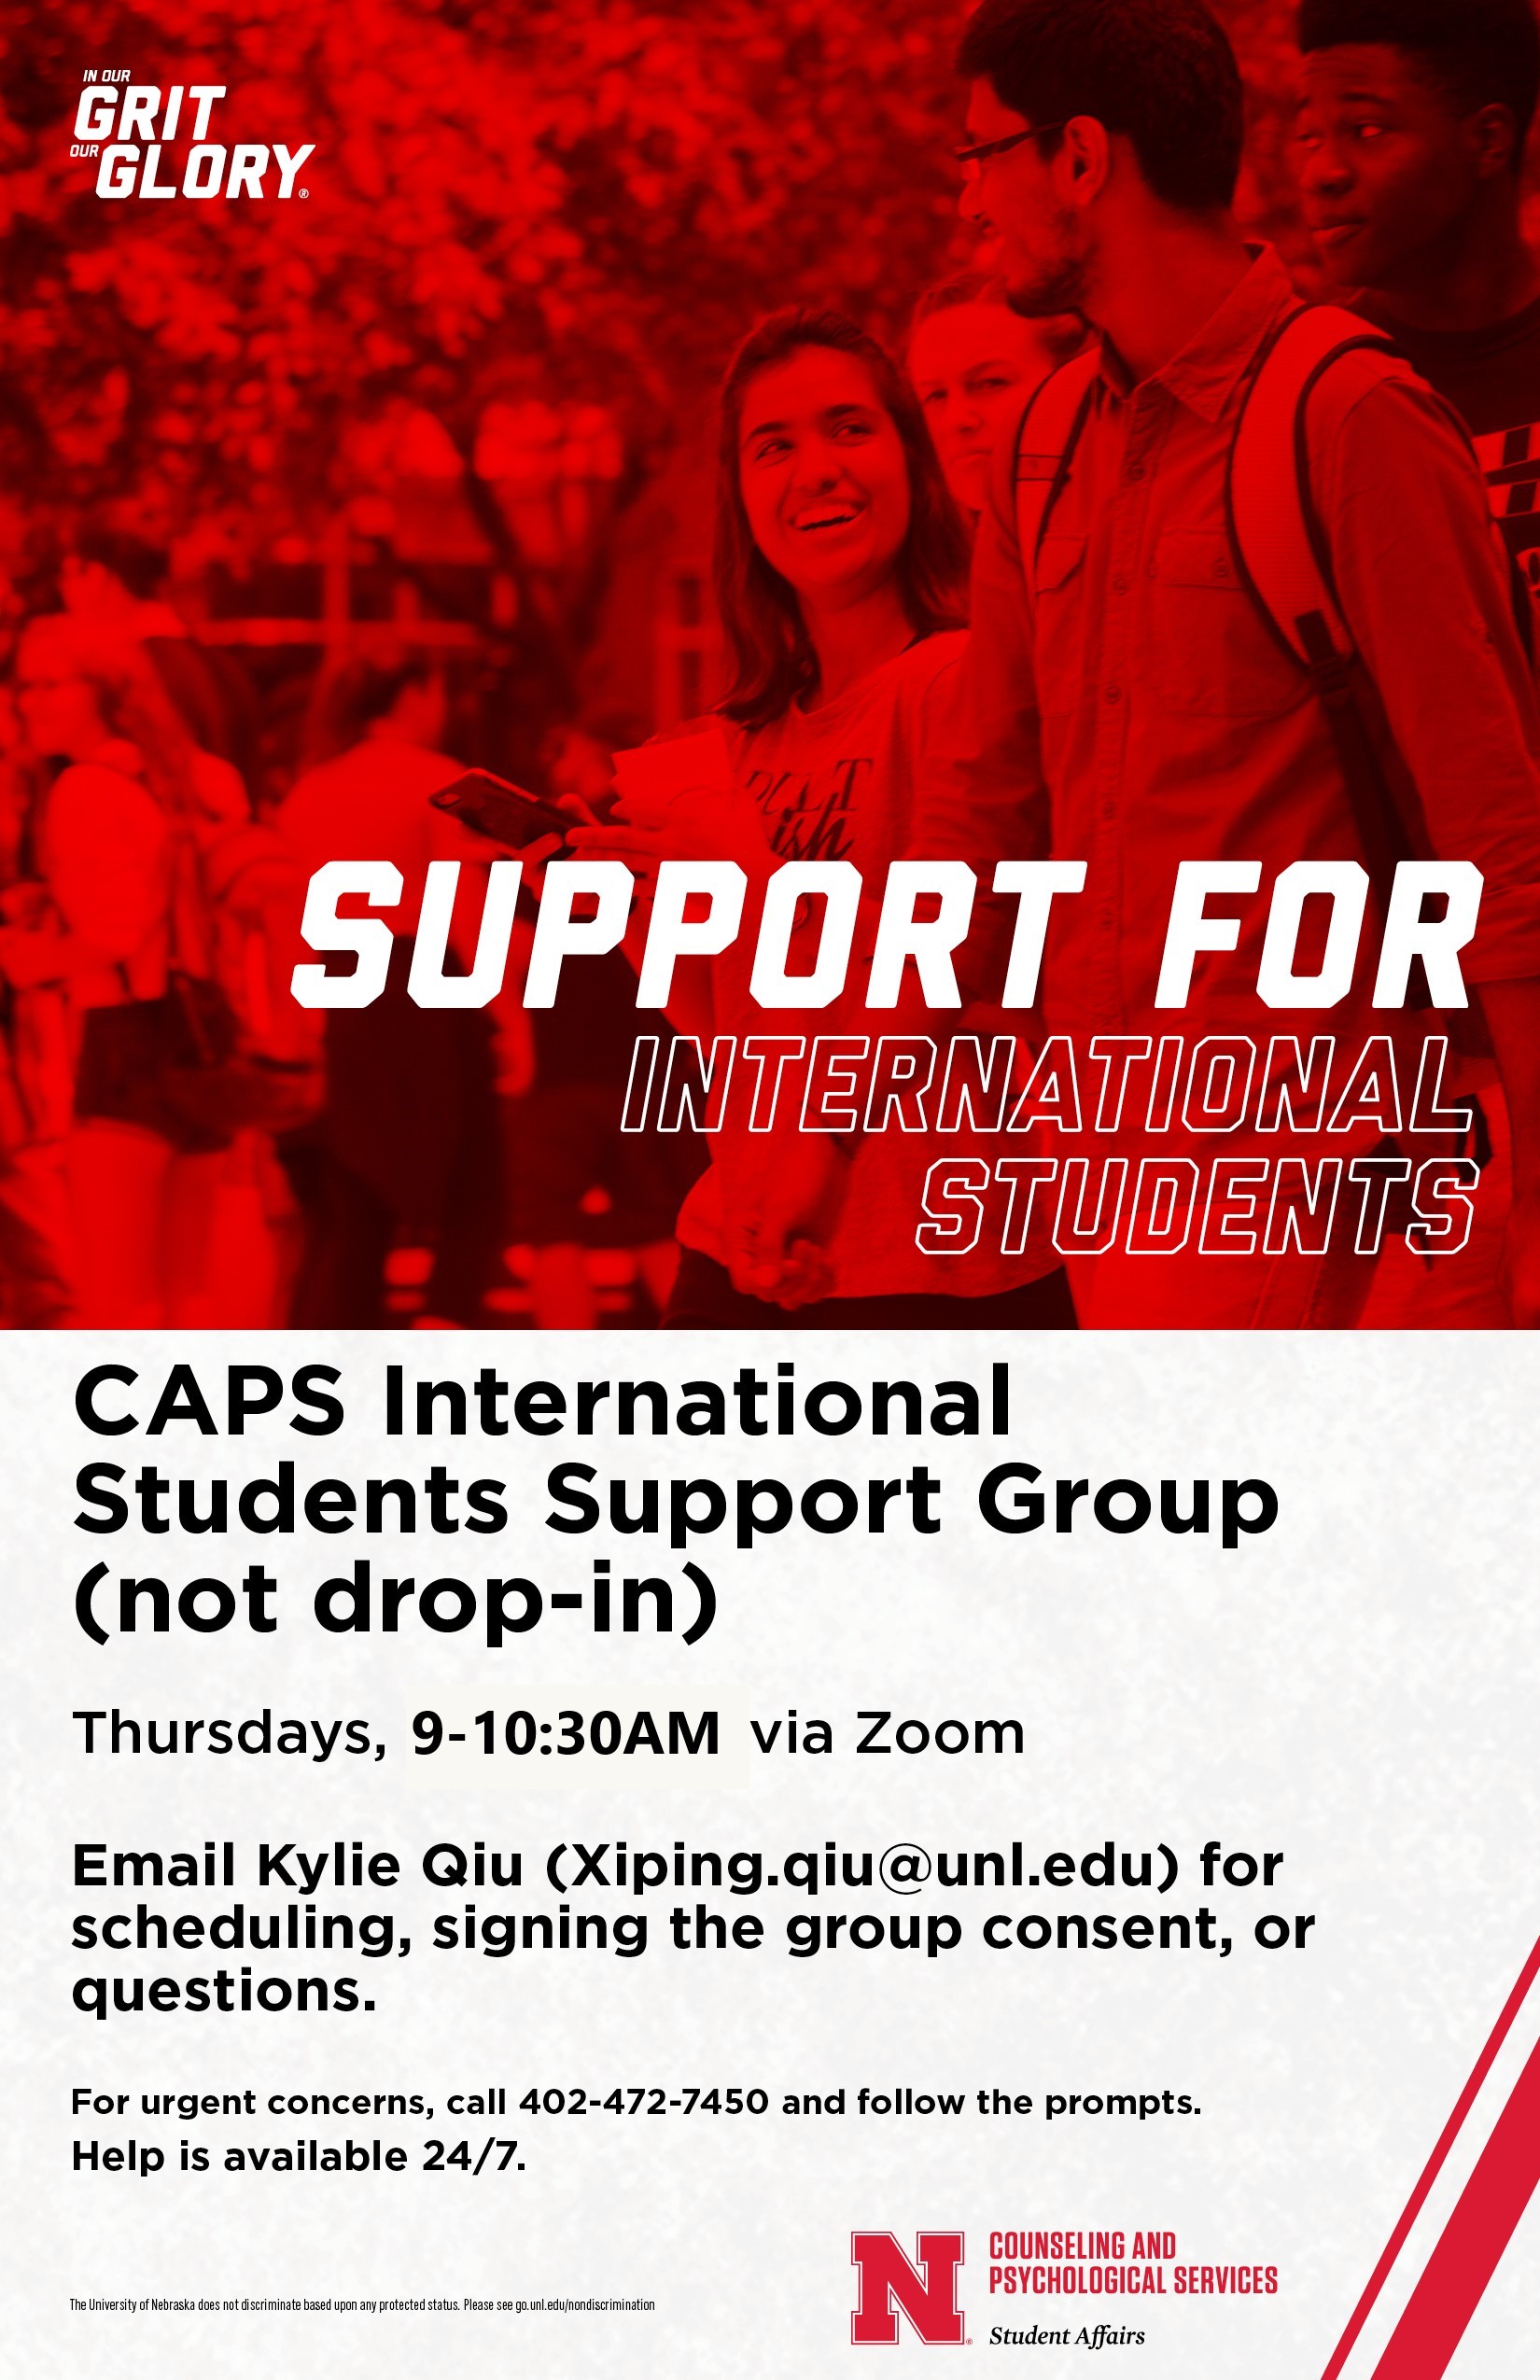 CAPS International Students Support Group (not drop-in)